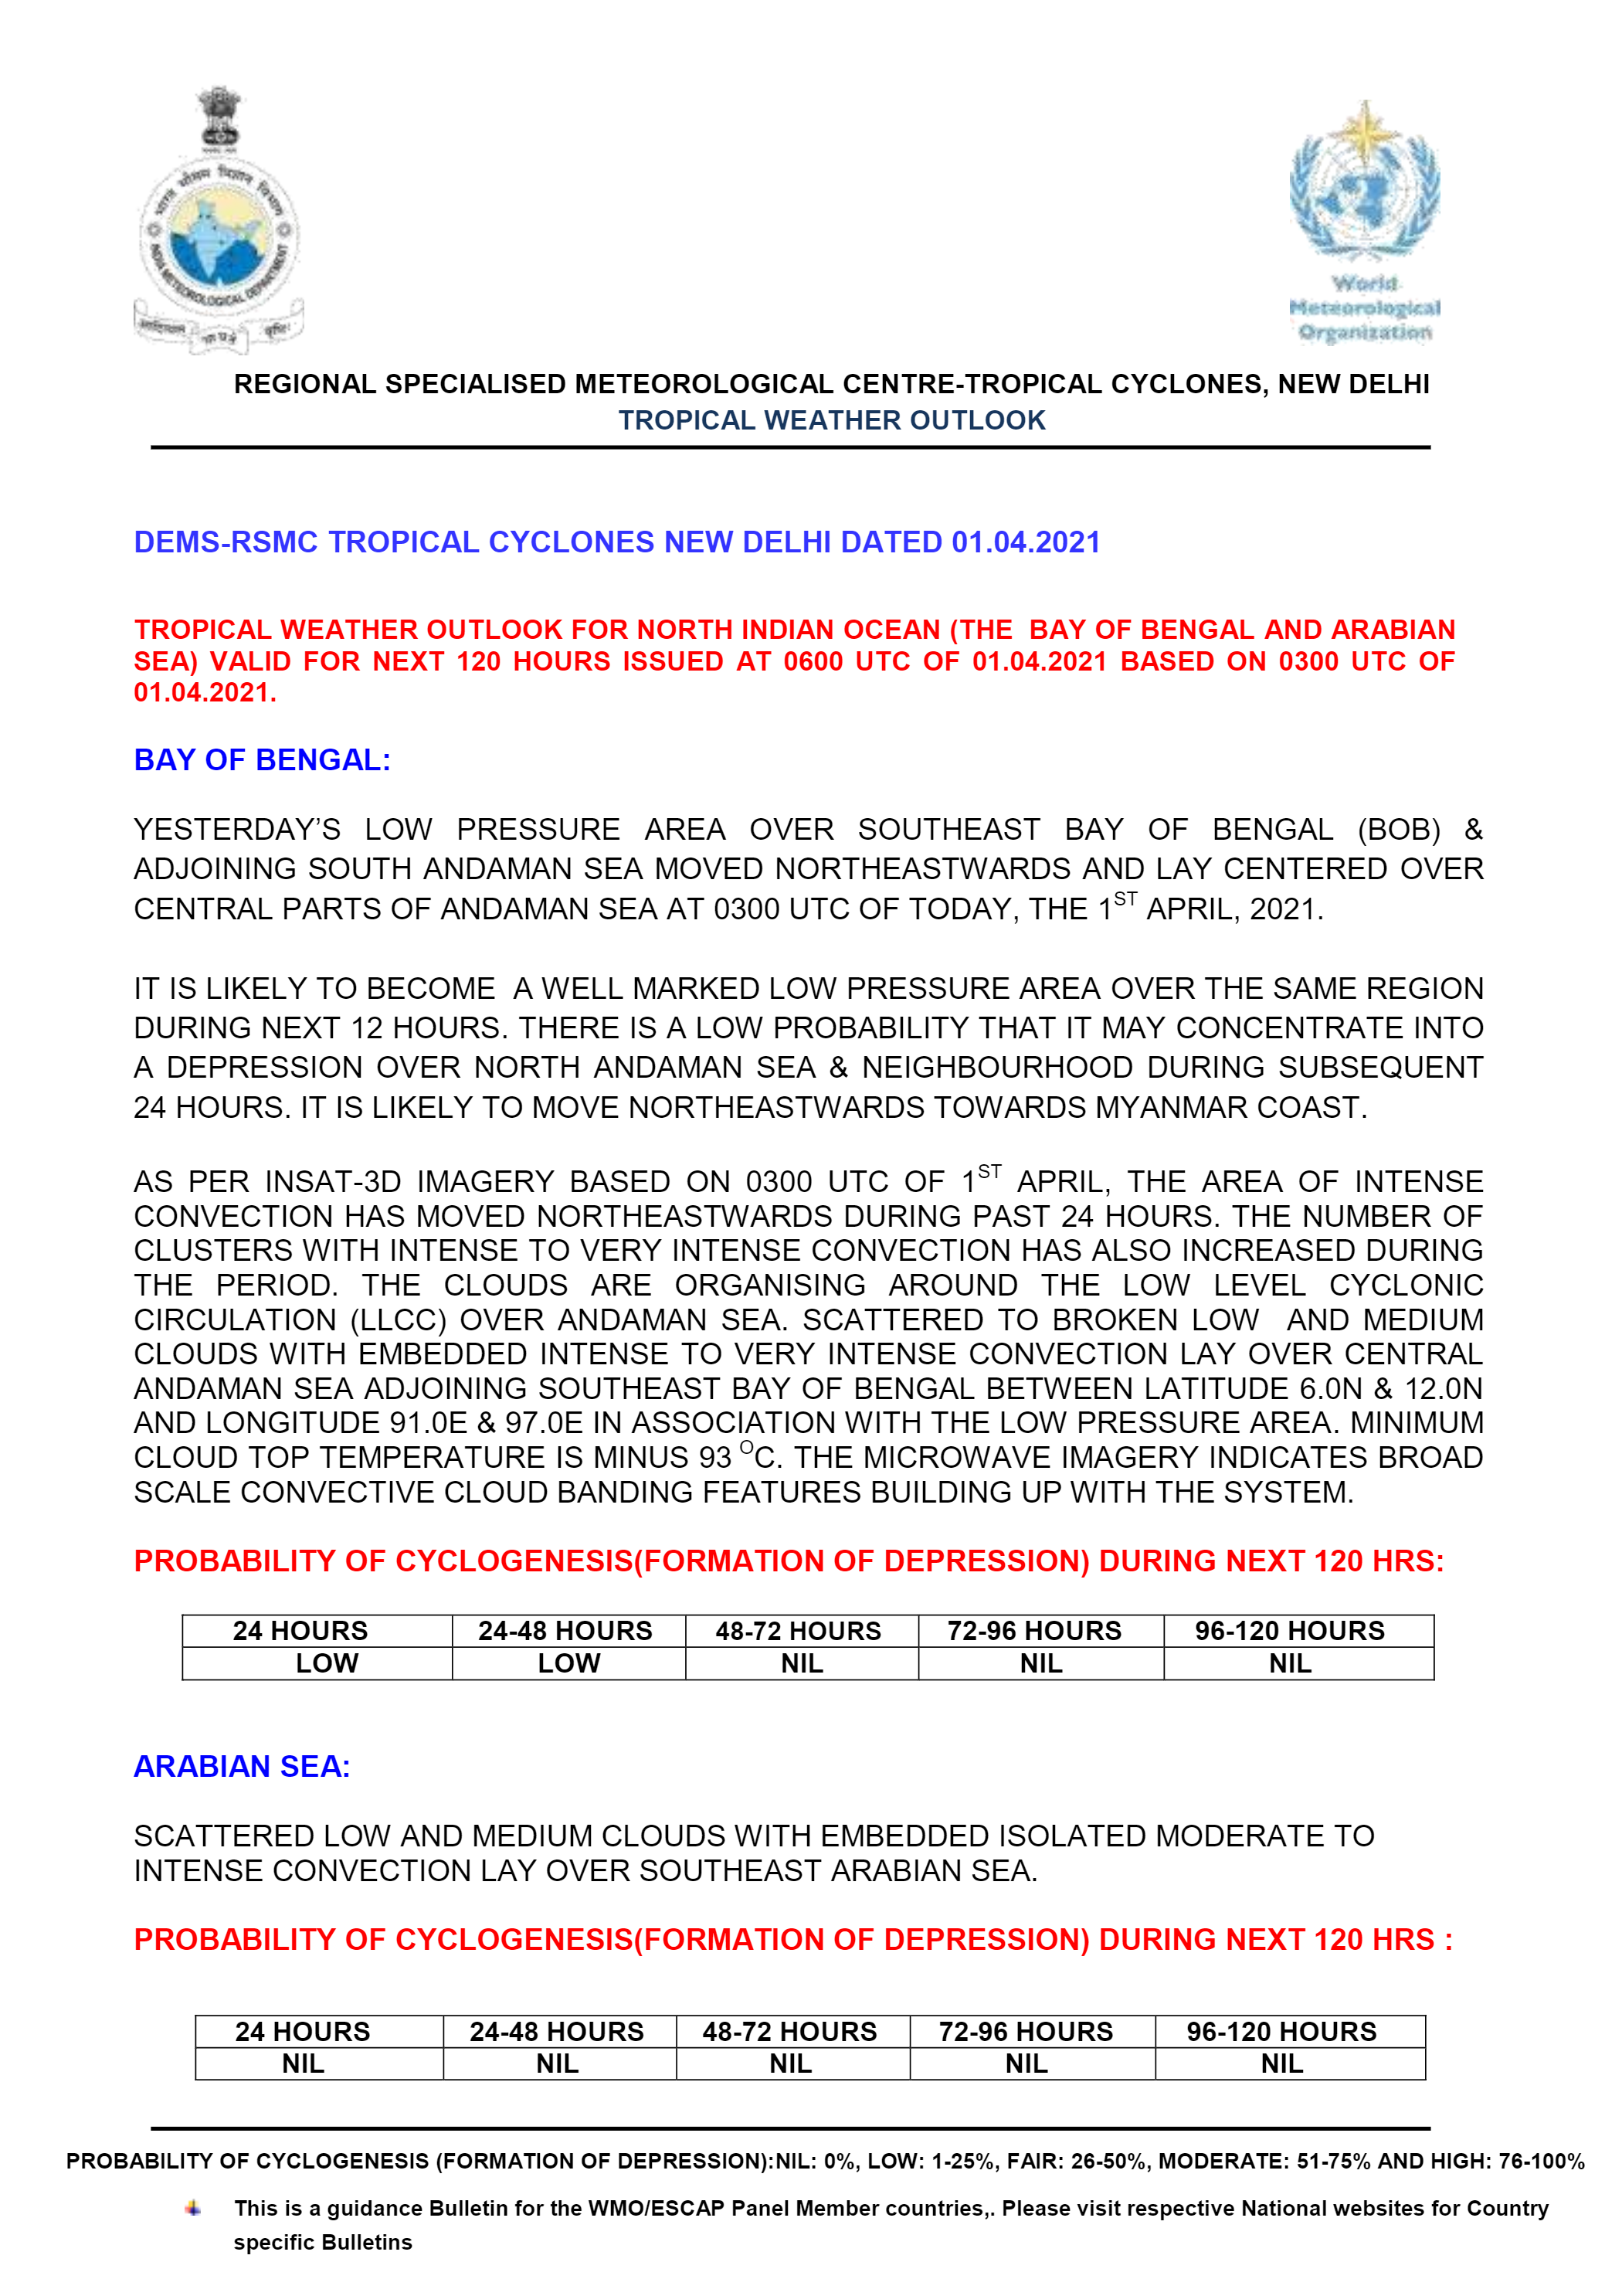 1_Tropical Weather Outlook based on  0300 UTC of 01.04.2021_60657d31caf51.png